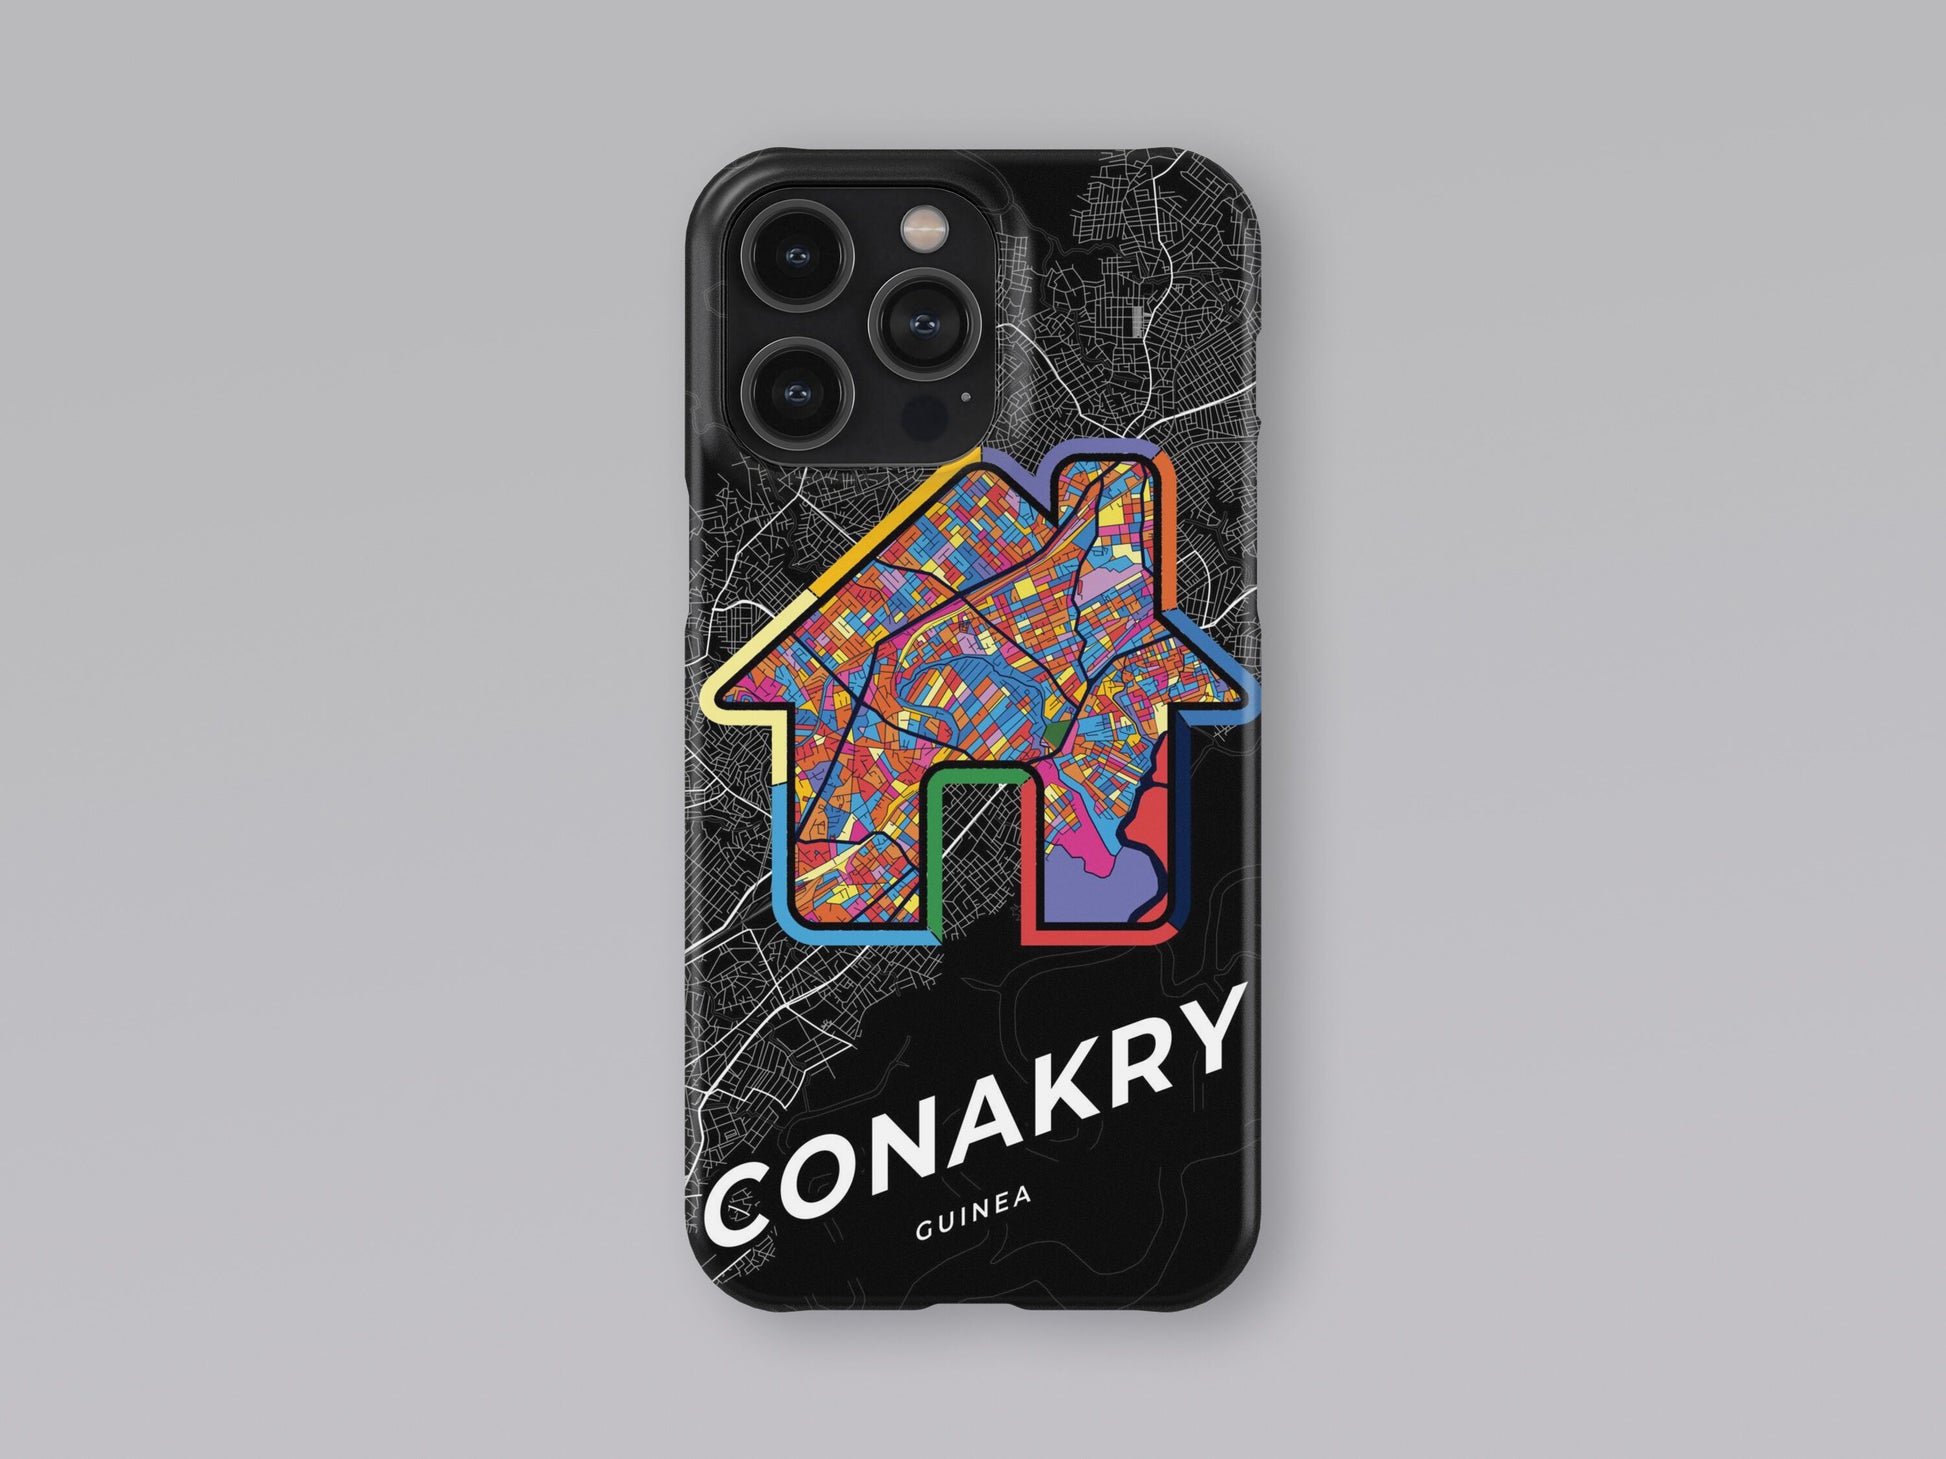 Conakry Guinea slim phone case with colorful icon. Birthday, wedding or housewarming gift. Couple match cases. 3